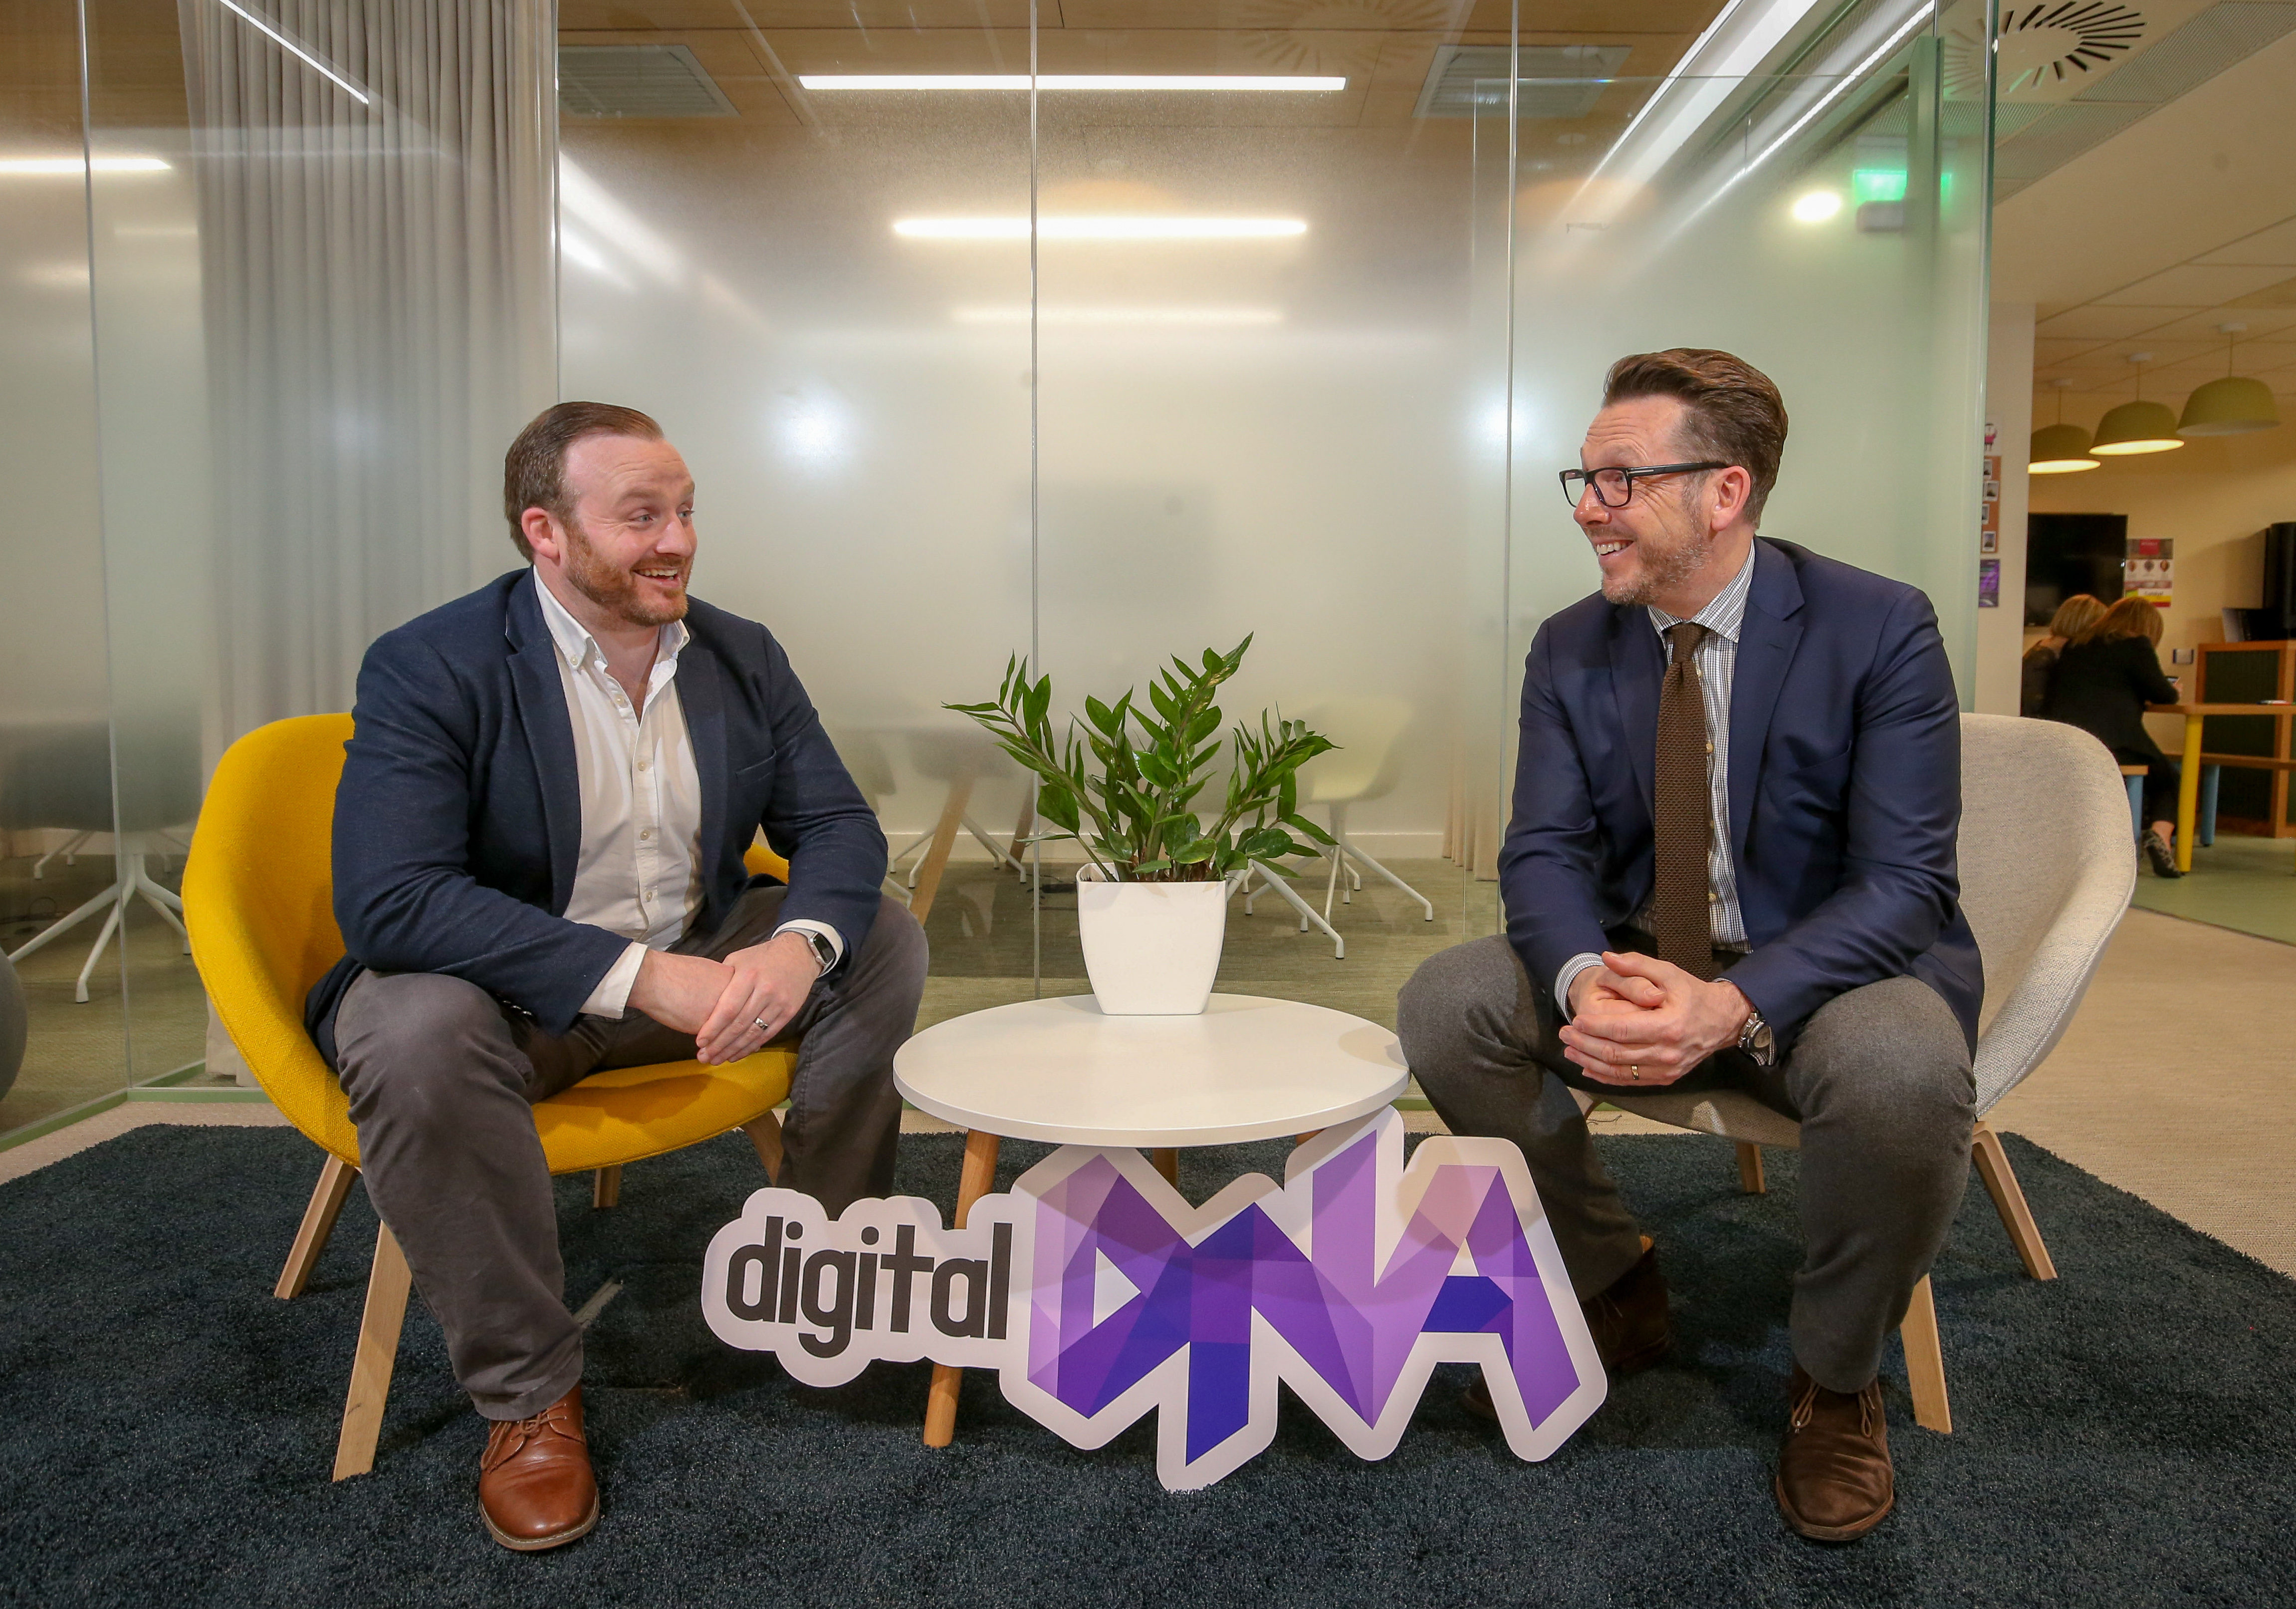 Two men in suits sit opposite each other at a coffee table, looking at each other and laughing. a purple 'DIgital DNA' sign sits in front of them.